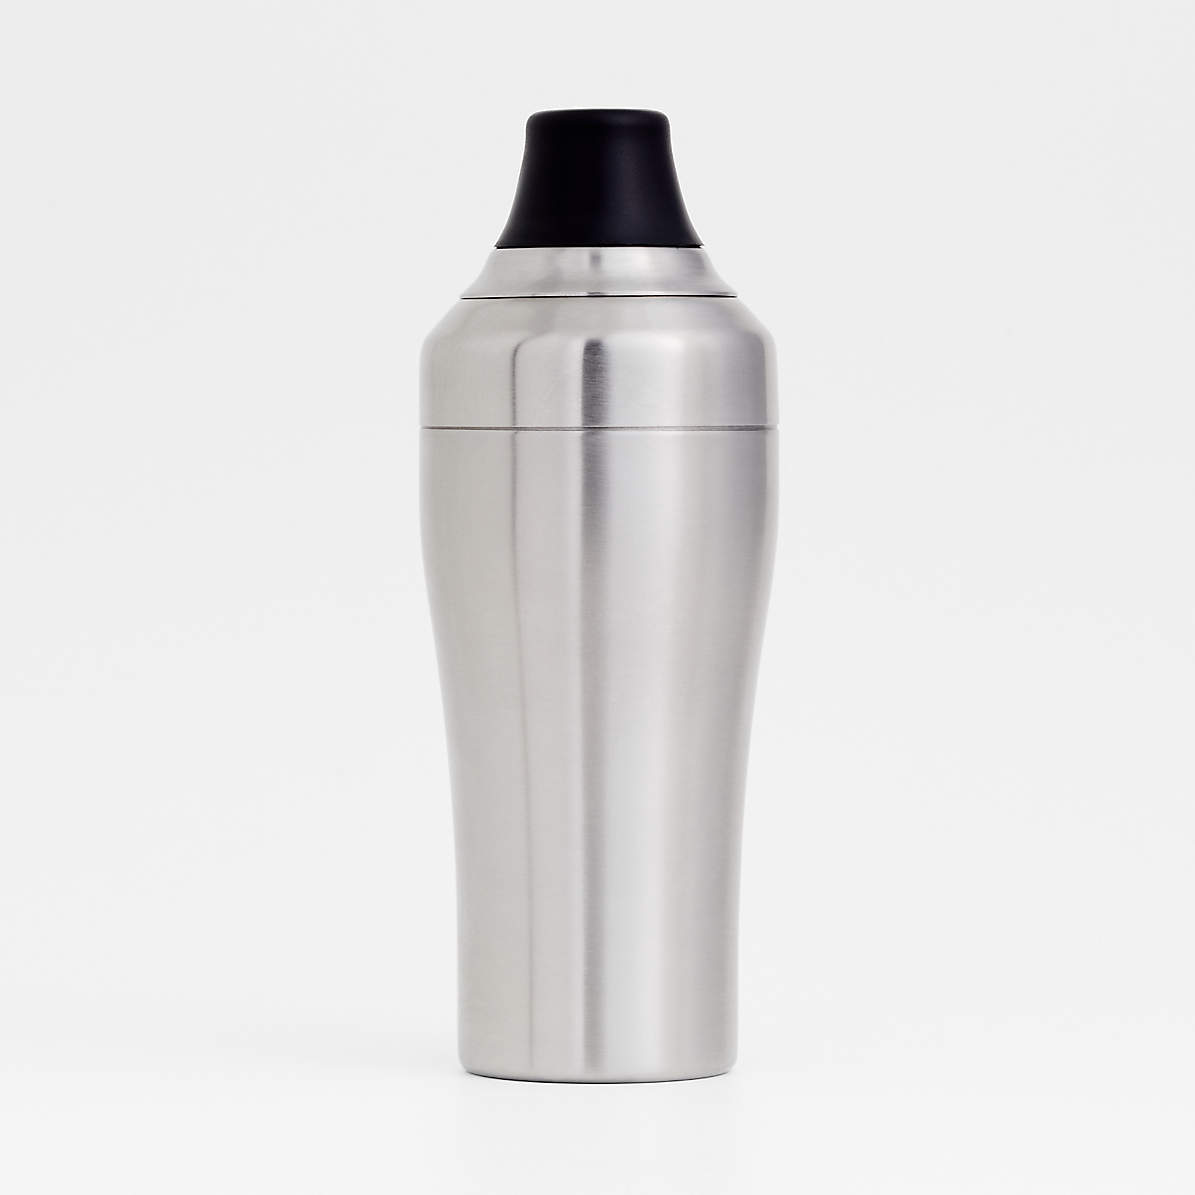 Gentleman Clip butterfly interior OXO Double-Walled Stainless Steel Cocktail Shaker + Reviews | Crate & Barrel